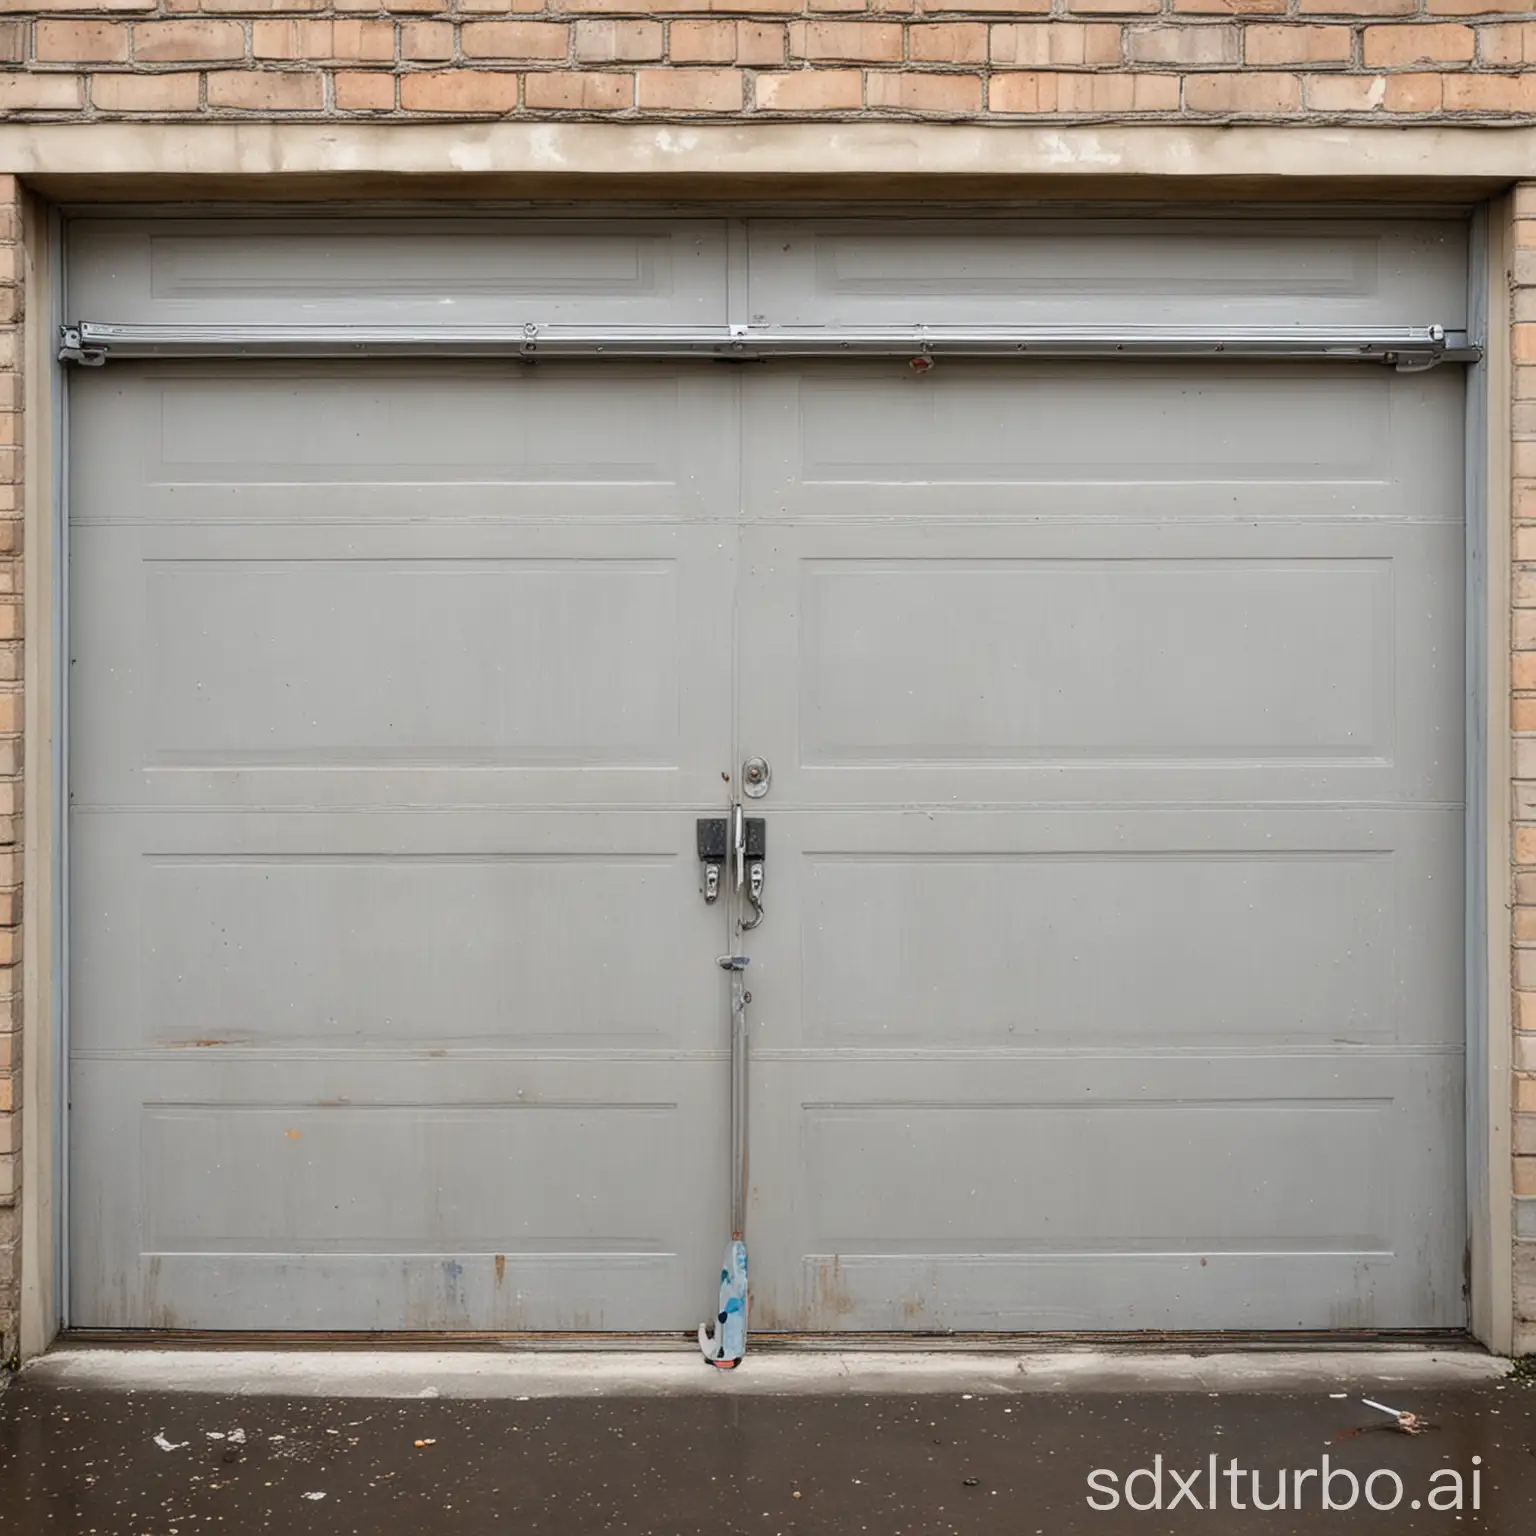 A garage door is being repaired. Tools are being used to fix the door. The door is made of metal and has a large window.